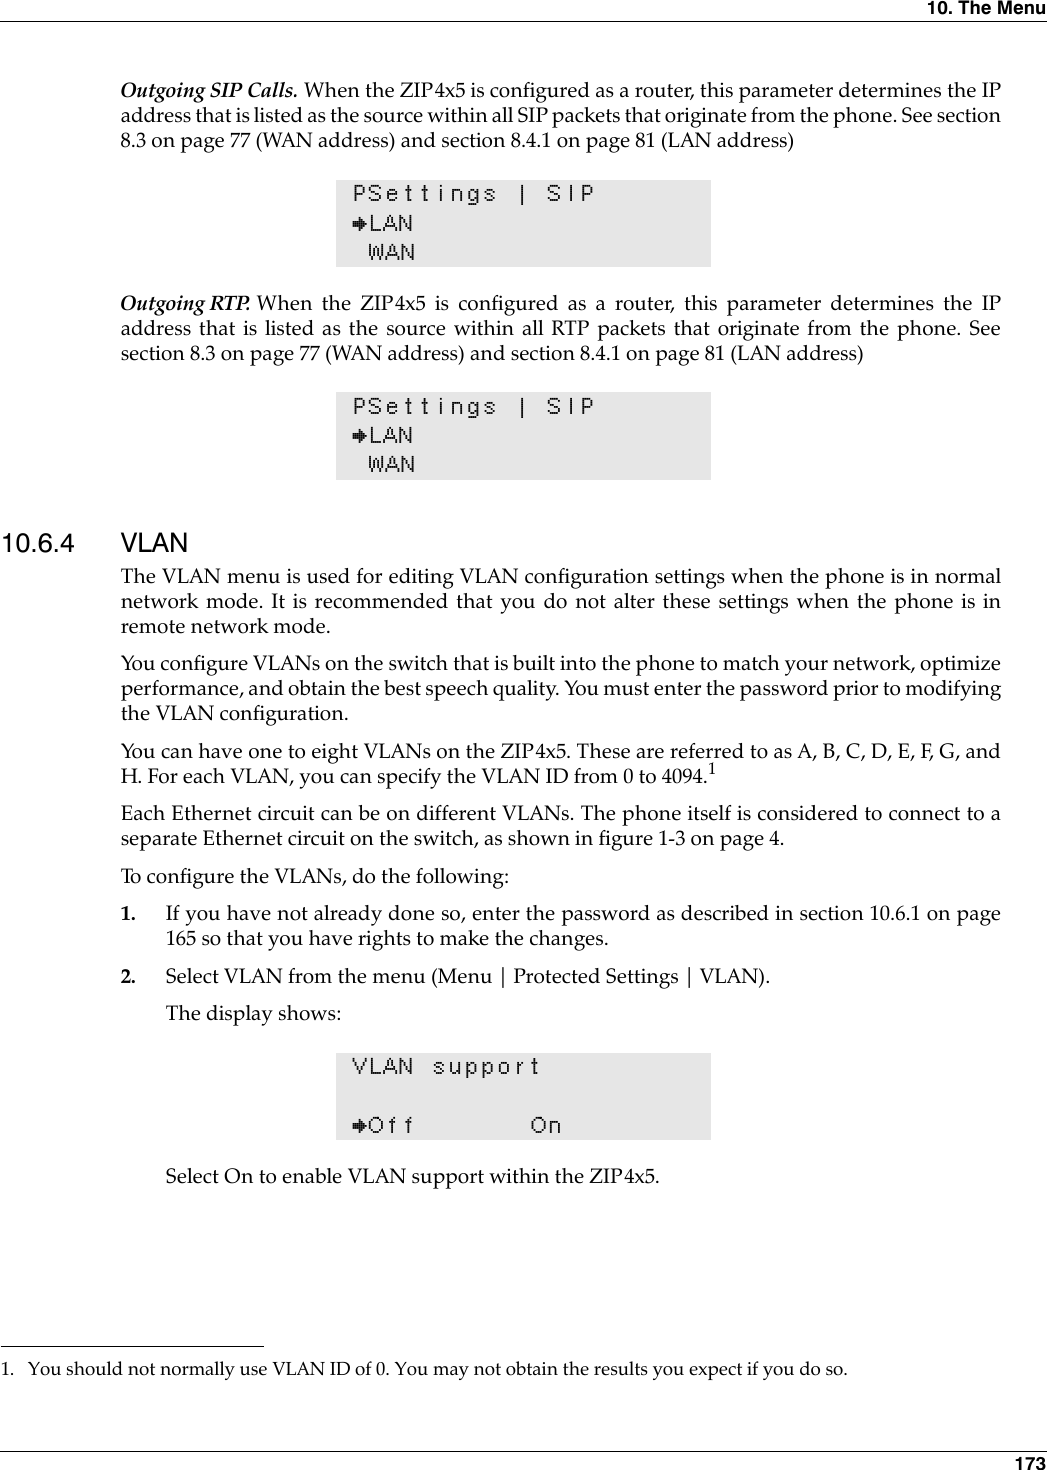 10. The Menu 173Outgoing SIP Calls. When the ZIP4x5 is configured as a router, this parameter determines the IPaddress that is listed as the source within all SIP packets that originate from the phone. See section8.3 on page 77 (WAN address) and section 8.4.1 on page 81 (LAN address)Outgoing RTP. When the ZIP4x5 is configured as a router, this parameter determines the IPaddress that is listed as the source within all RTP packets that originate from the phone. Seesection 8.3 on page 77 (WAN address) and section 8.4.1 on page 81 (LAN address)10.6.4 VLANThe VLAN menu is used for editing VLAN configuration settings when the phone is in normalnetwork mode. It is recommended that you do not alter these settings when the phone is inremote network mode.You configure VLANs on the switch that is built into the phone to match your network, optimizeperformance, and obtain the best speech quality. You must enter the password prior to modifyingthe VLAN configuration.You can have one to eight VLANs on the ZIP4x5. These are referred to as A, B, C, D, E, F, G, andH. For each VLAN, you can specify the VLAN ID from 0 to 4094.1Each Ethernet circuit can be on different VLANs. The phone itself is considered to connect to aseparate Ethernet circuit on the switch, as shown in figure 1-3 on page 4.To configure the VLANs, do the following:1. If you have not already done so, enter the password as described in section 10.6.1 on page165 so that you have rights to make the changes.2. Select VLAN from the menu (Menu | Protected Settings | VLAN).The display shows:Select On to enable VLAN support within the ZIP4x5.PSettings | SIP}LANWANPSettings | SIP}LANWAN1. You should not normally use VLAN ID of 0. You may not obtain the results you expect if you do so.VLAN support}Off On